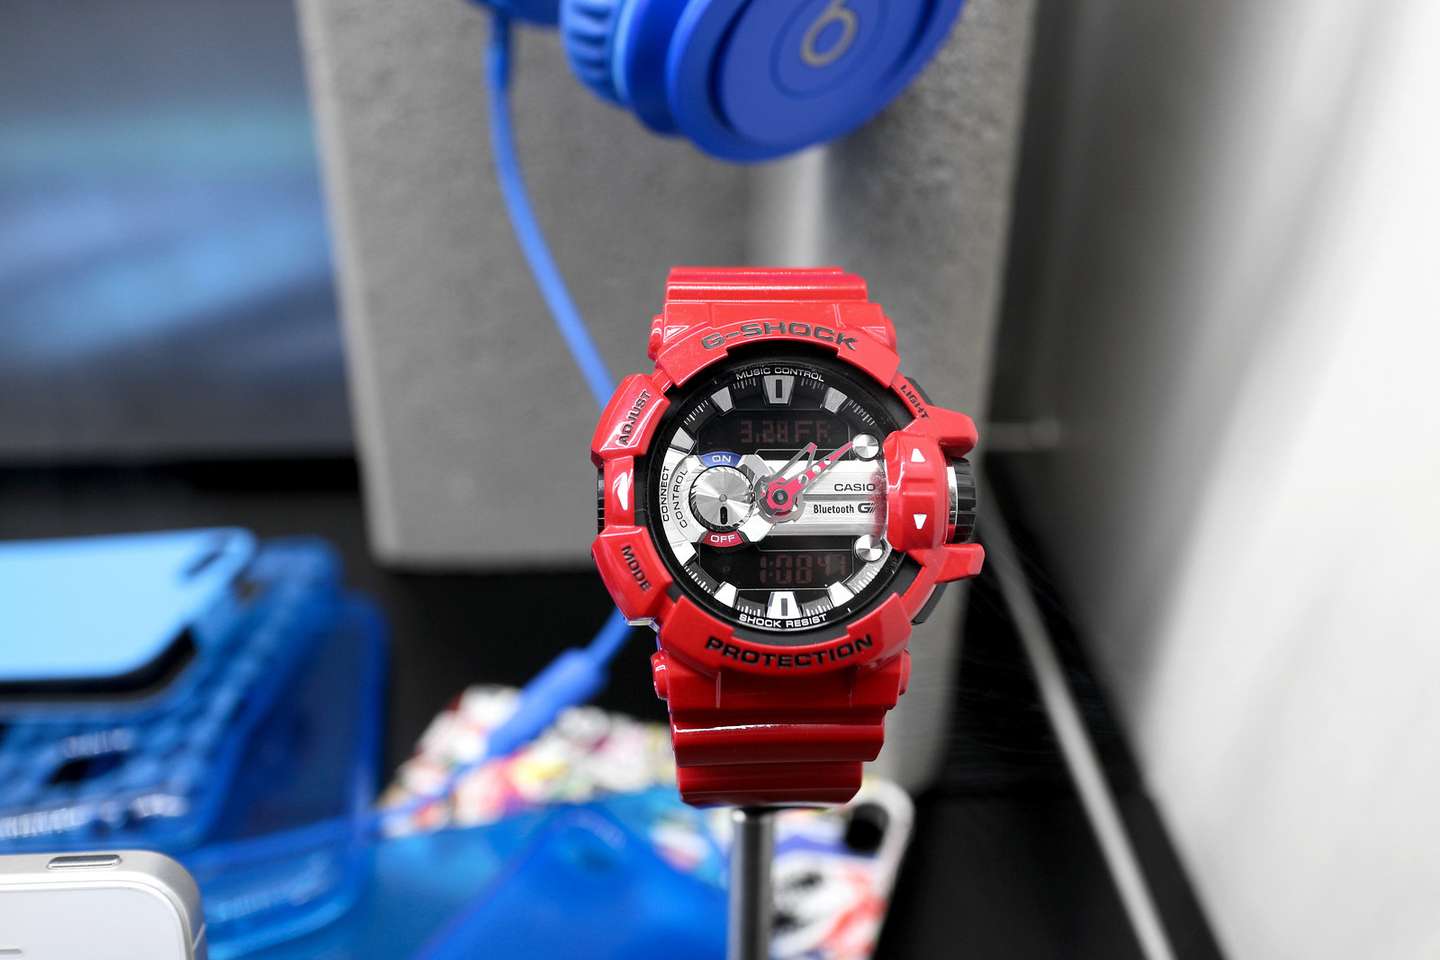 Casio Launches Newest Bluetooth G-Shock Watch at Baselworld